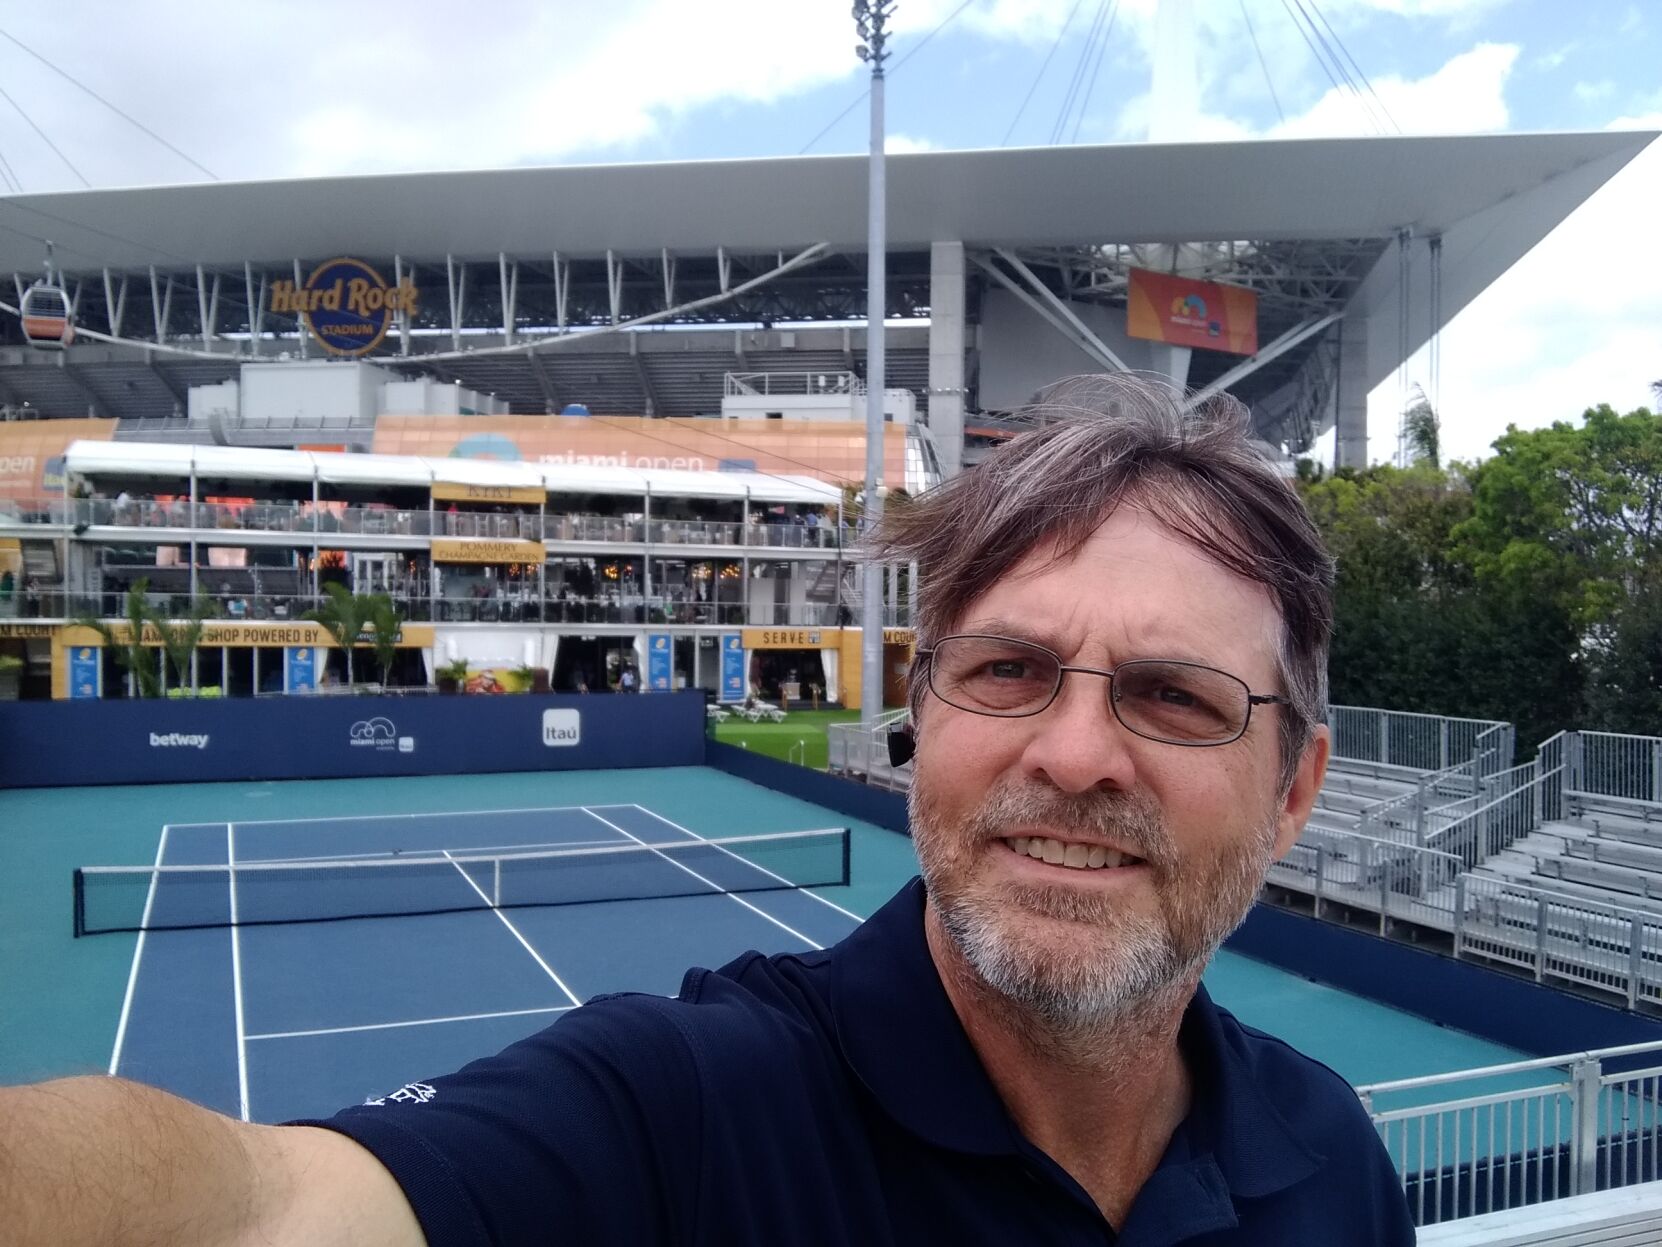 On the Scene Serving Up Tennis at a Site Built for Football  thevillagesdailysun